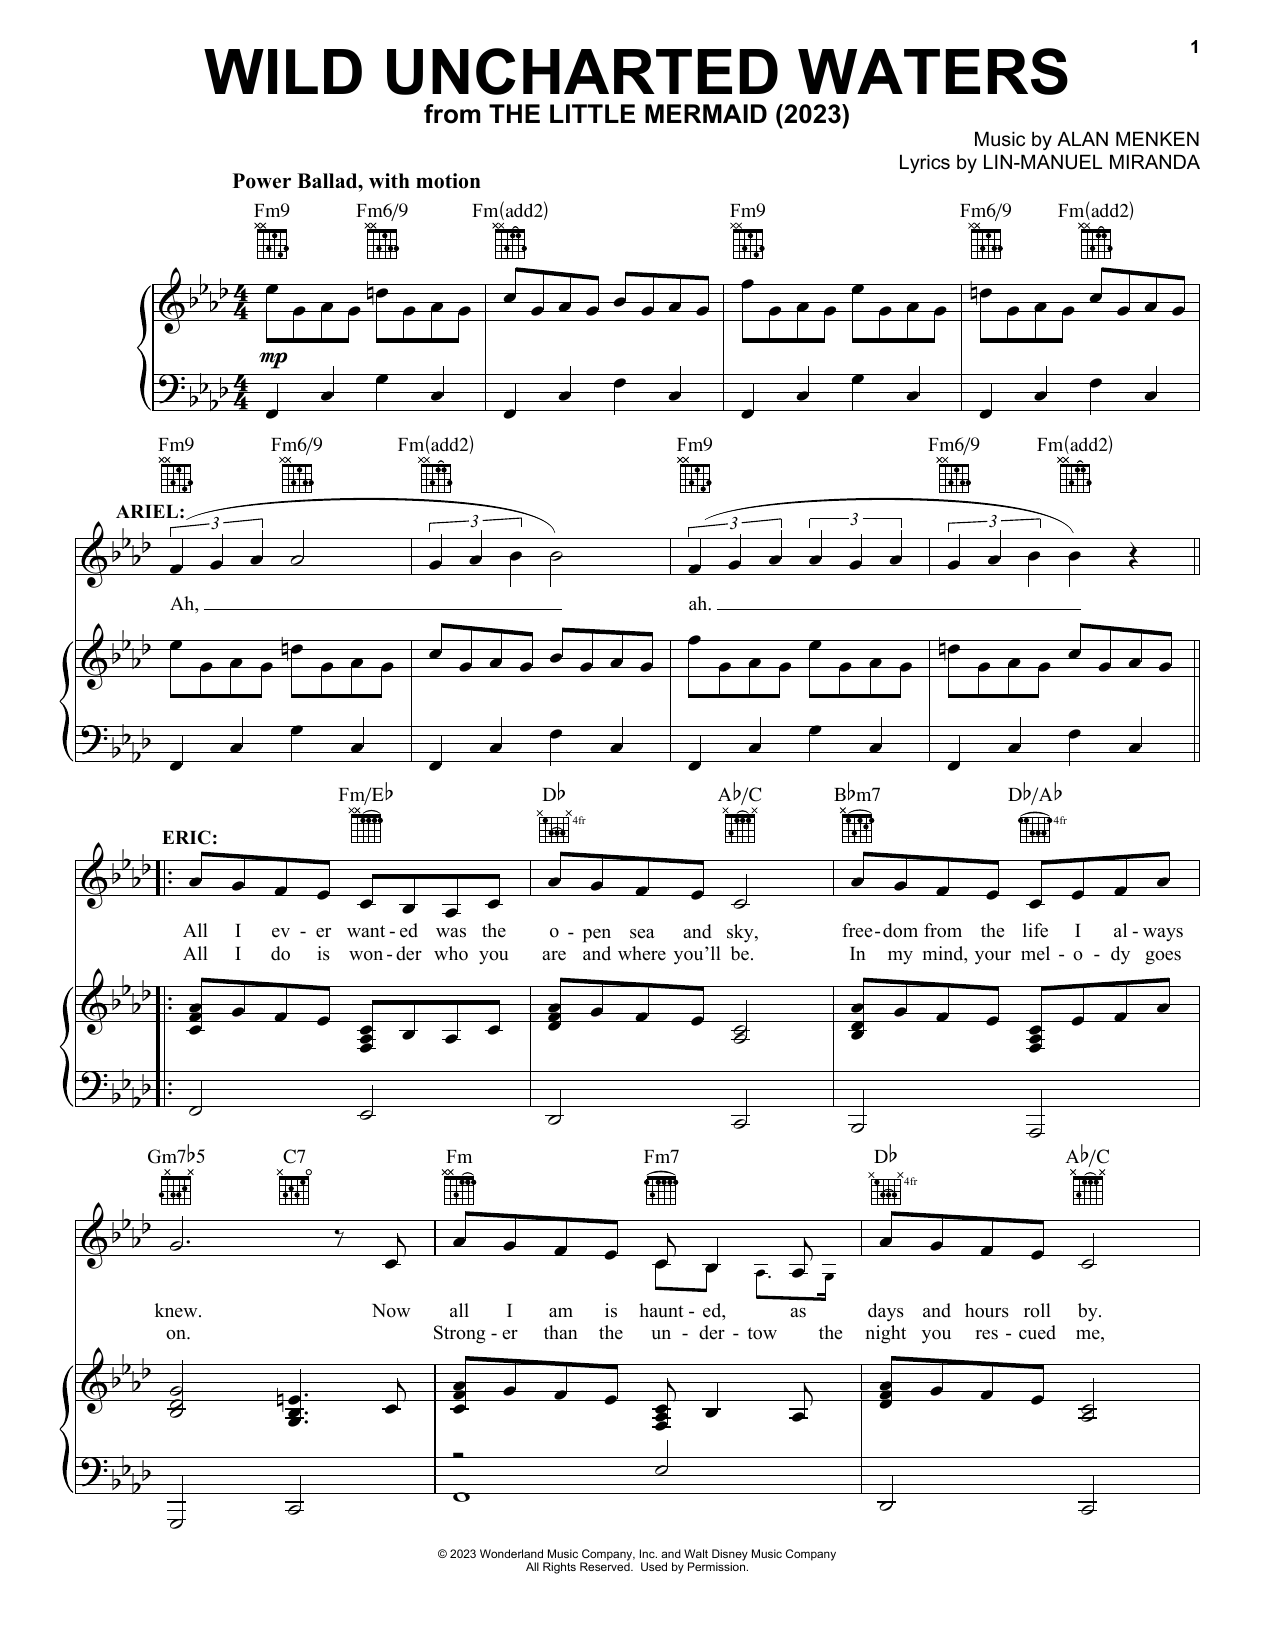 Download Jonah Hauer-King Wild Uncharted Waters (from The Little Sheet Music